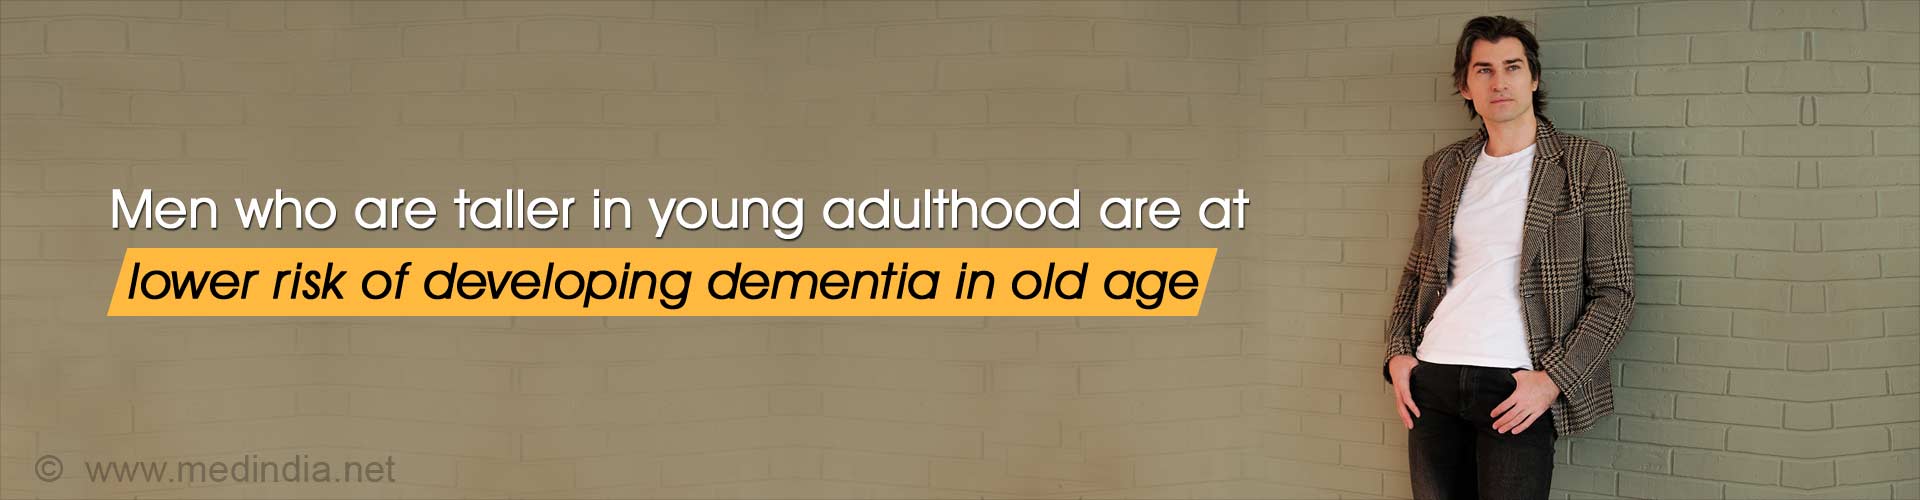 Men who are taller in young adulthood are at lower risk of developing dementia in old age.